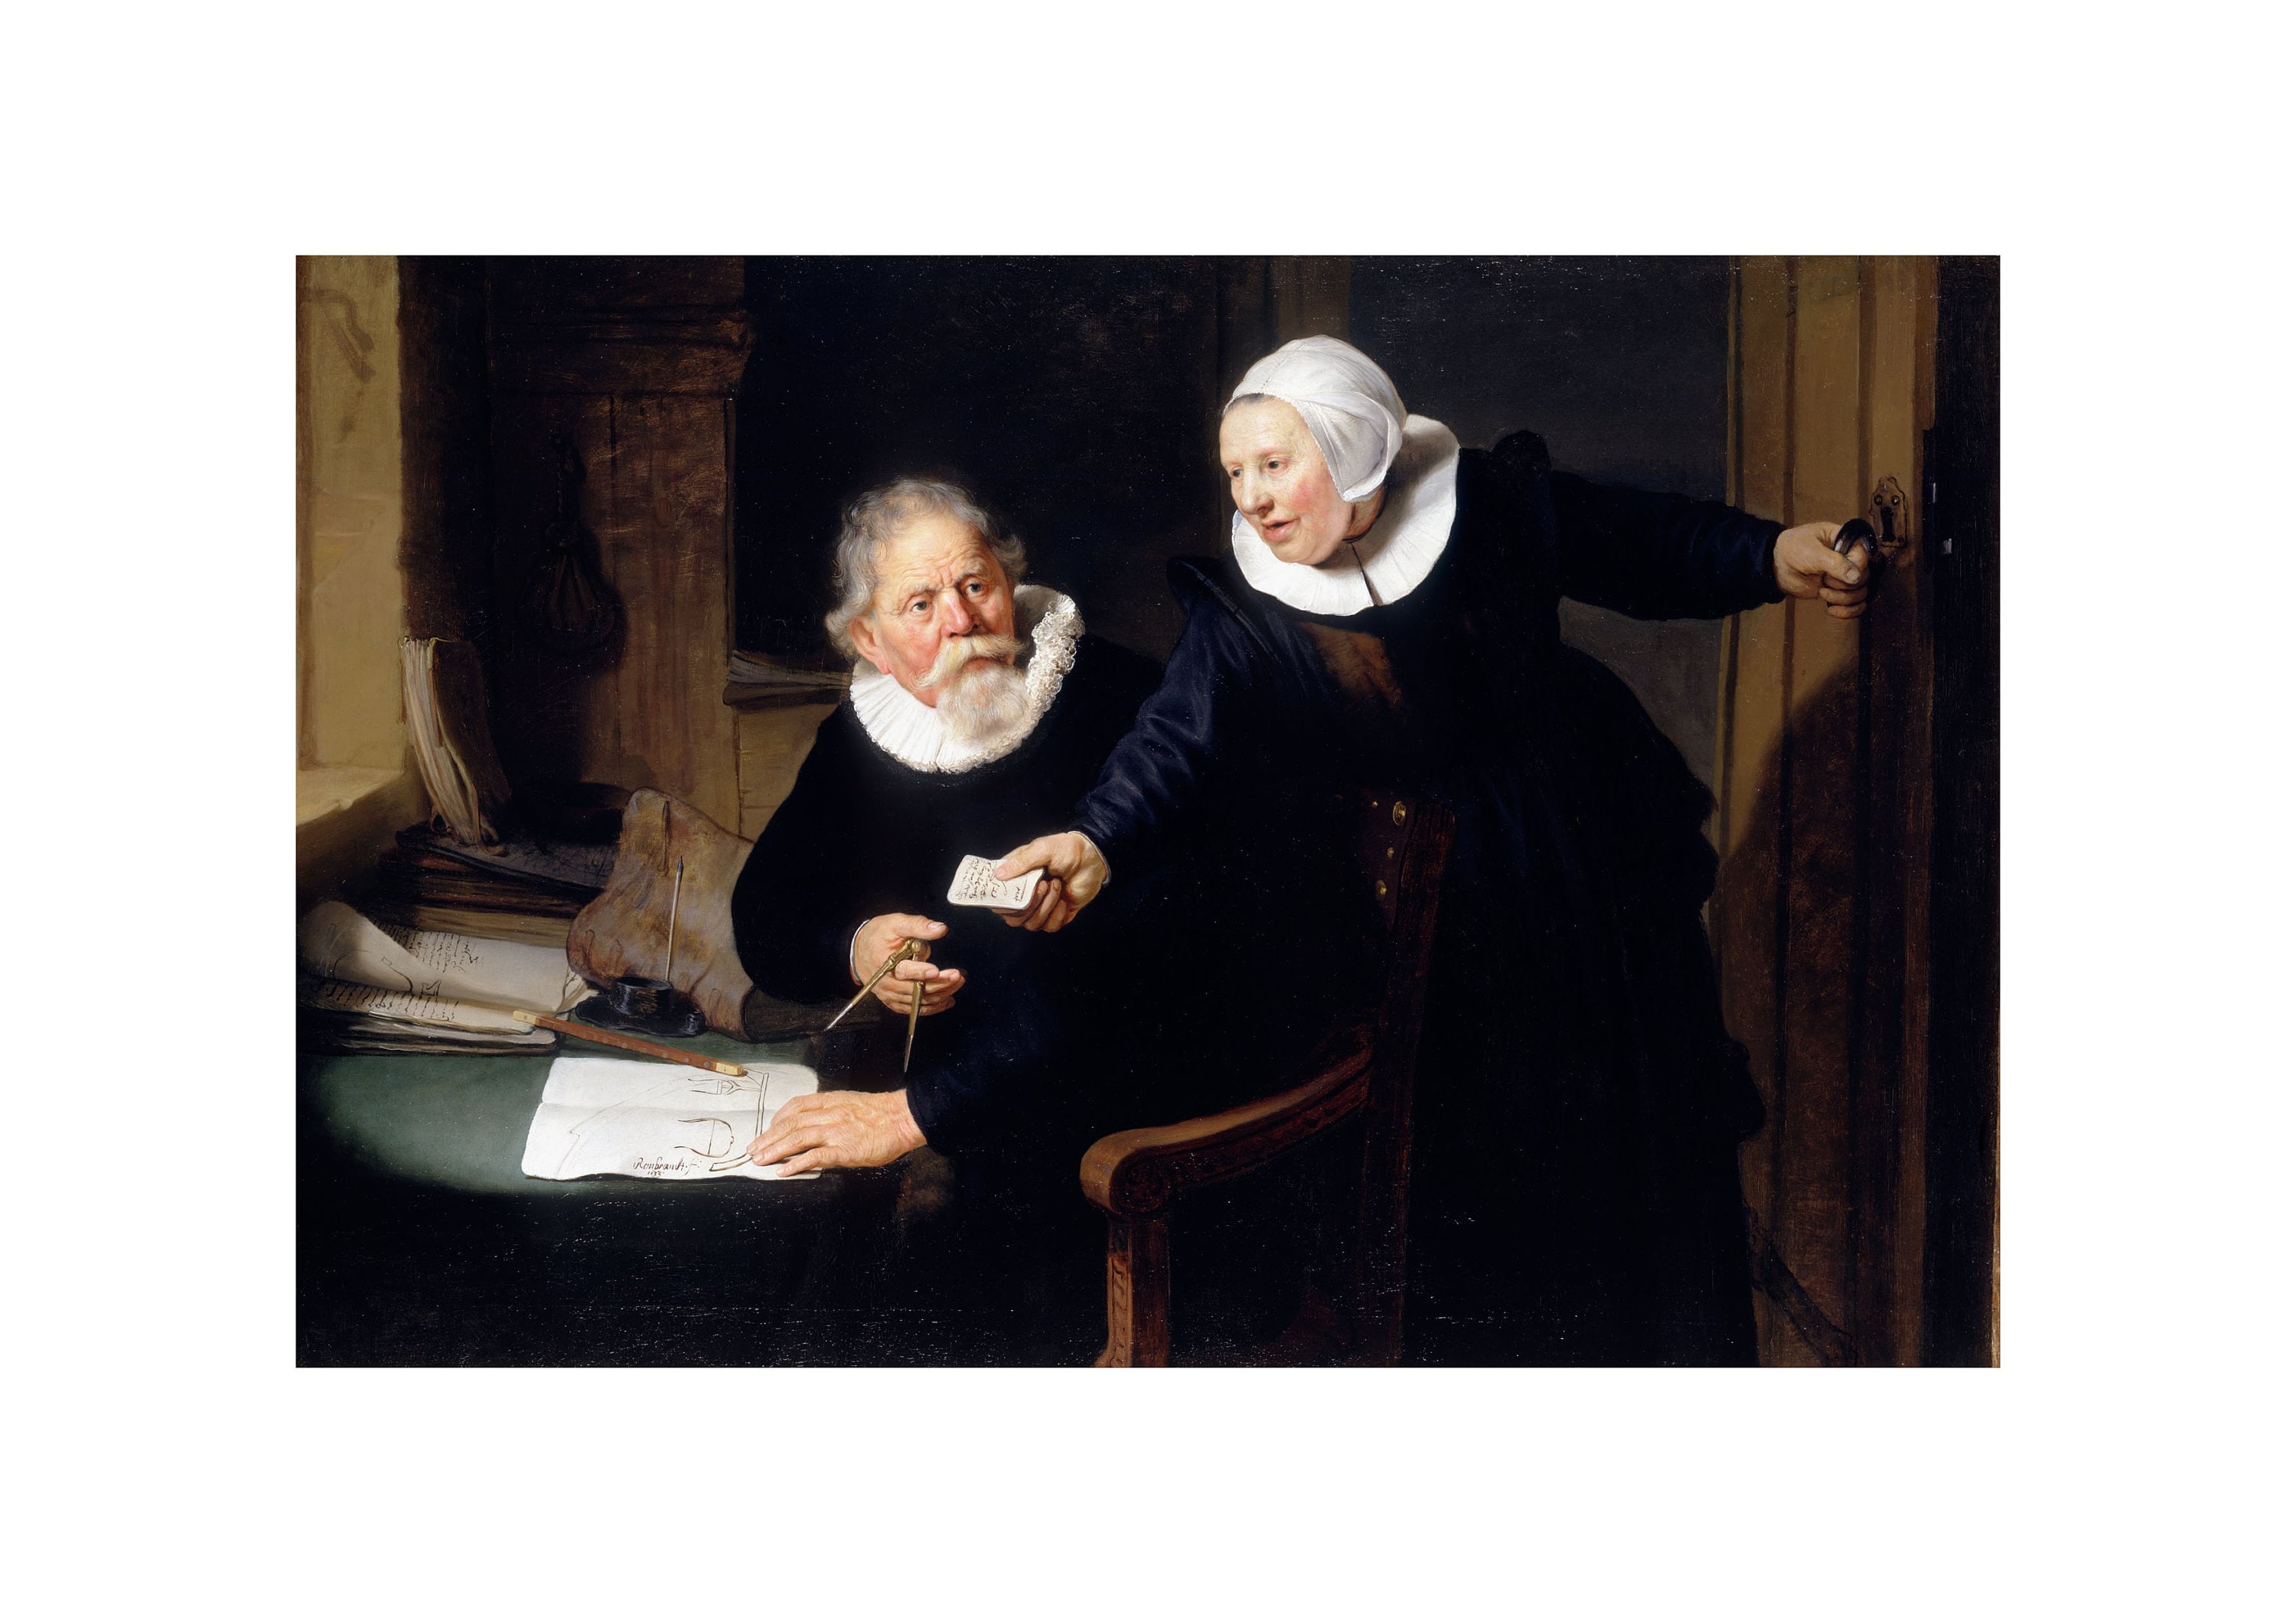 Rembrandt van Rijn : The Shipbuilder and his Wife Museum Quality Giclee Print/Canvas 1633 A4/A3/A2